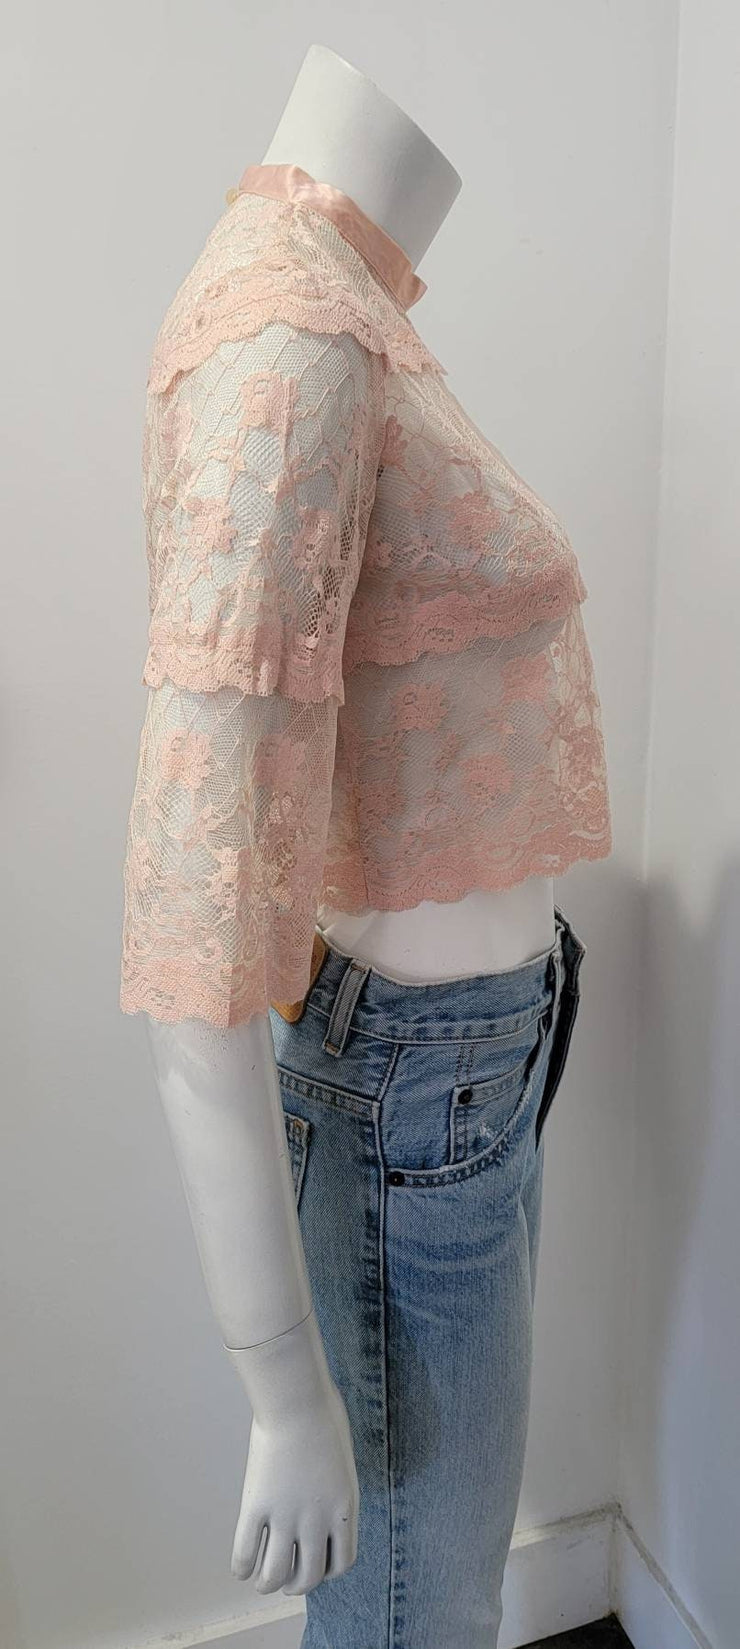 Vintage Tiered Scallop Lace Flutter Cap Sleeve Crop Top S/M